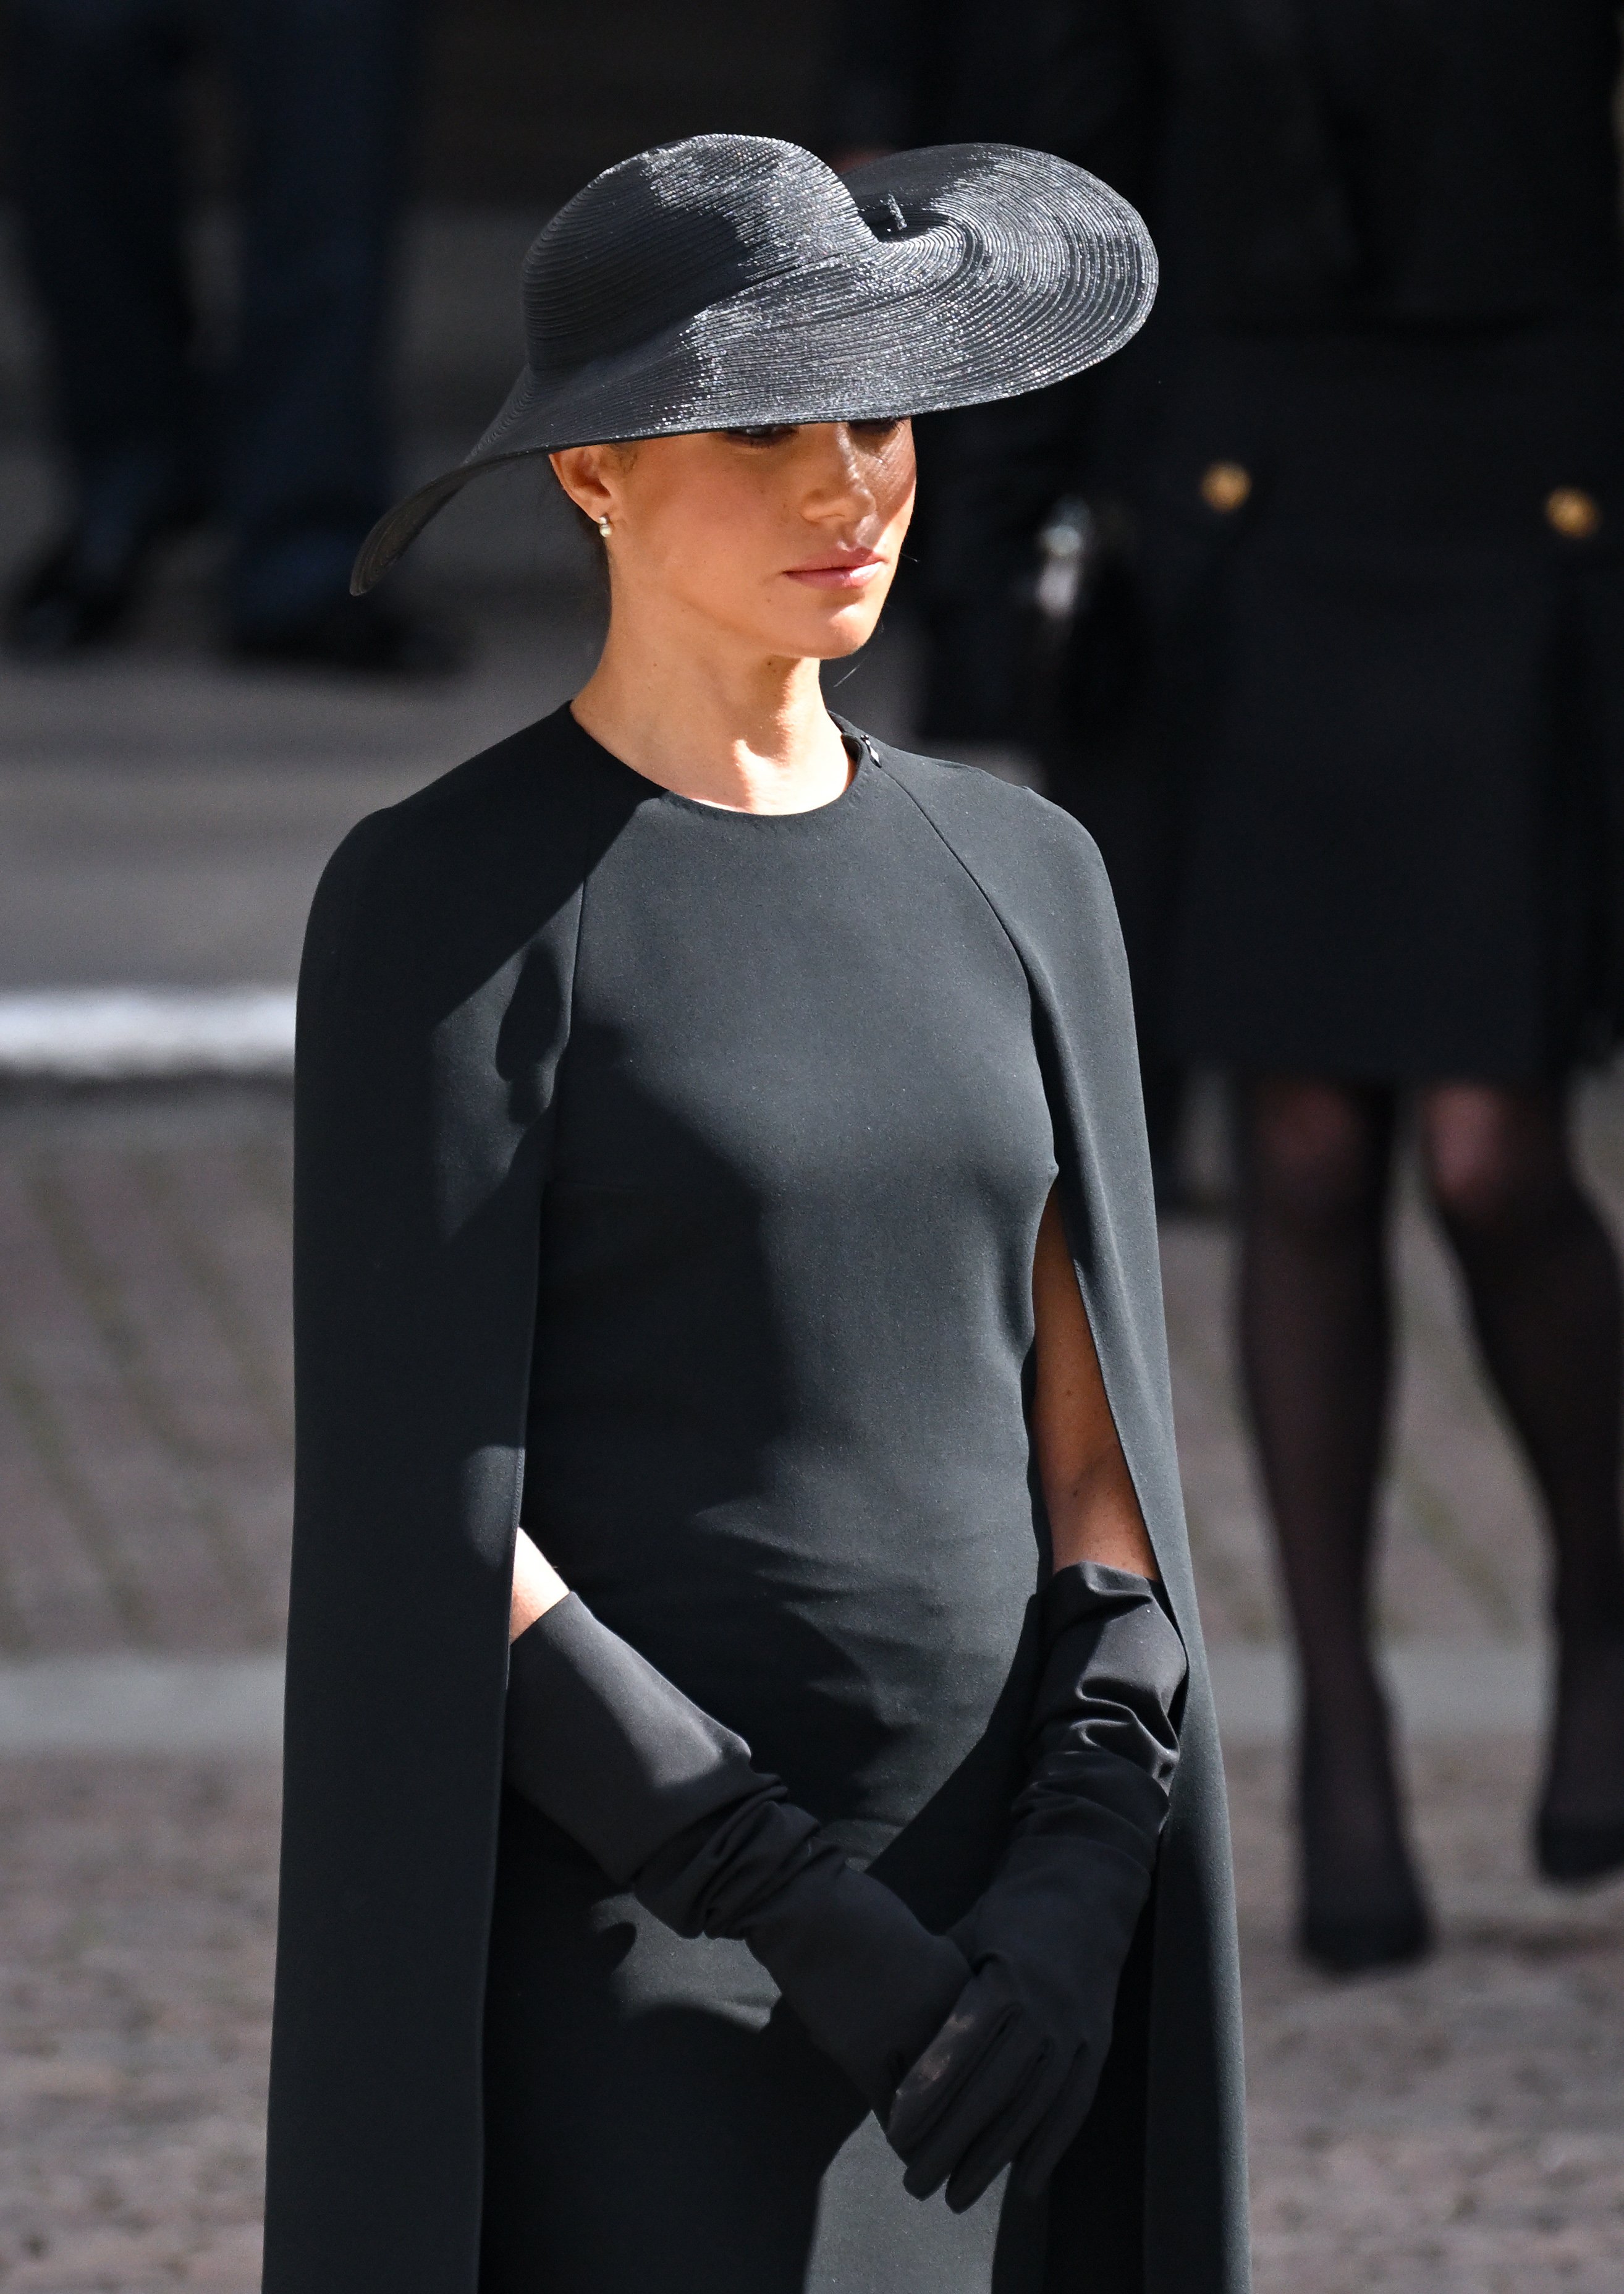     Meghan, Duchess of Sussex during the State Funeral of Queen Elizabeth II at Westminster Abbey on September 19, 2022 in London, England |  Source: Getty Images 